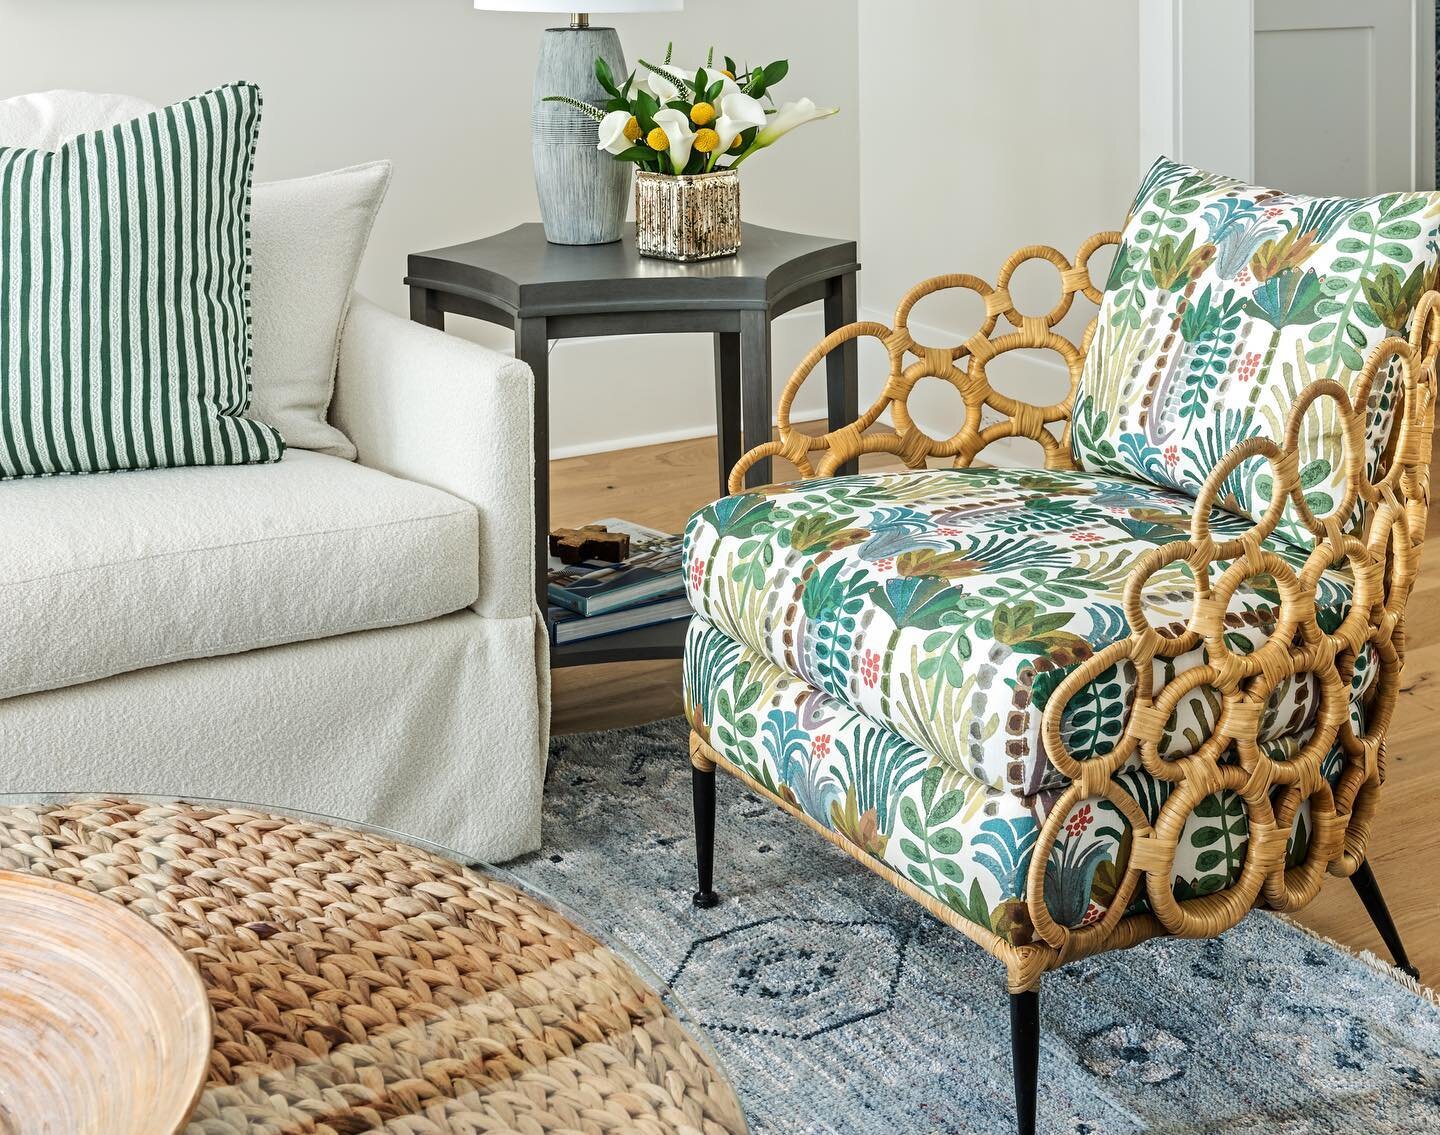 Color, pattern, and texture -
this living room has it all! All of the upholstery was custom made to create the perfect living room for our client. Photography by @trippsmithphotography for @chdmag #indigoalleyinteriors